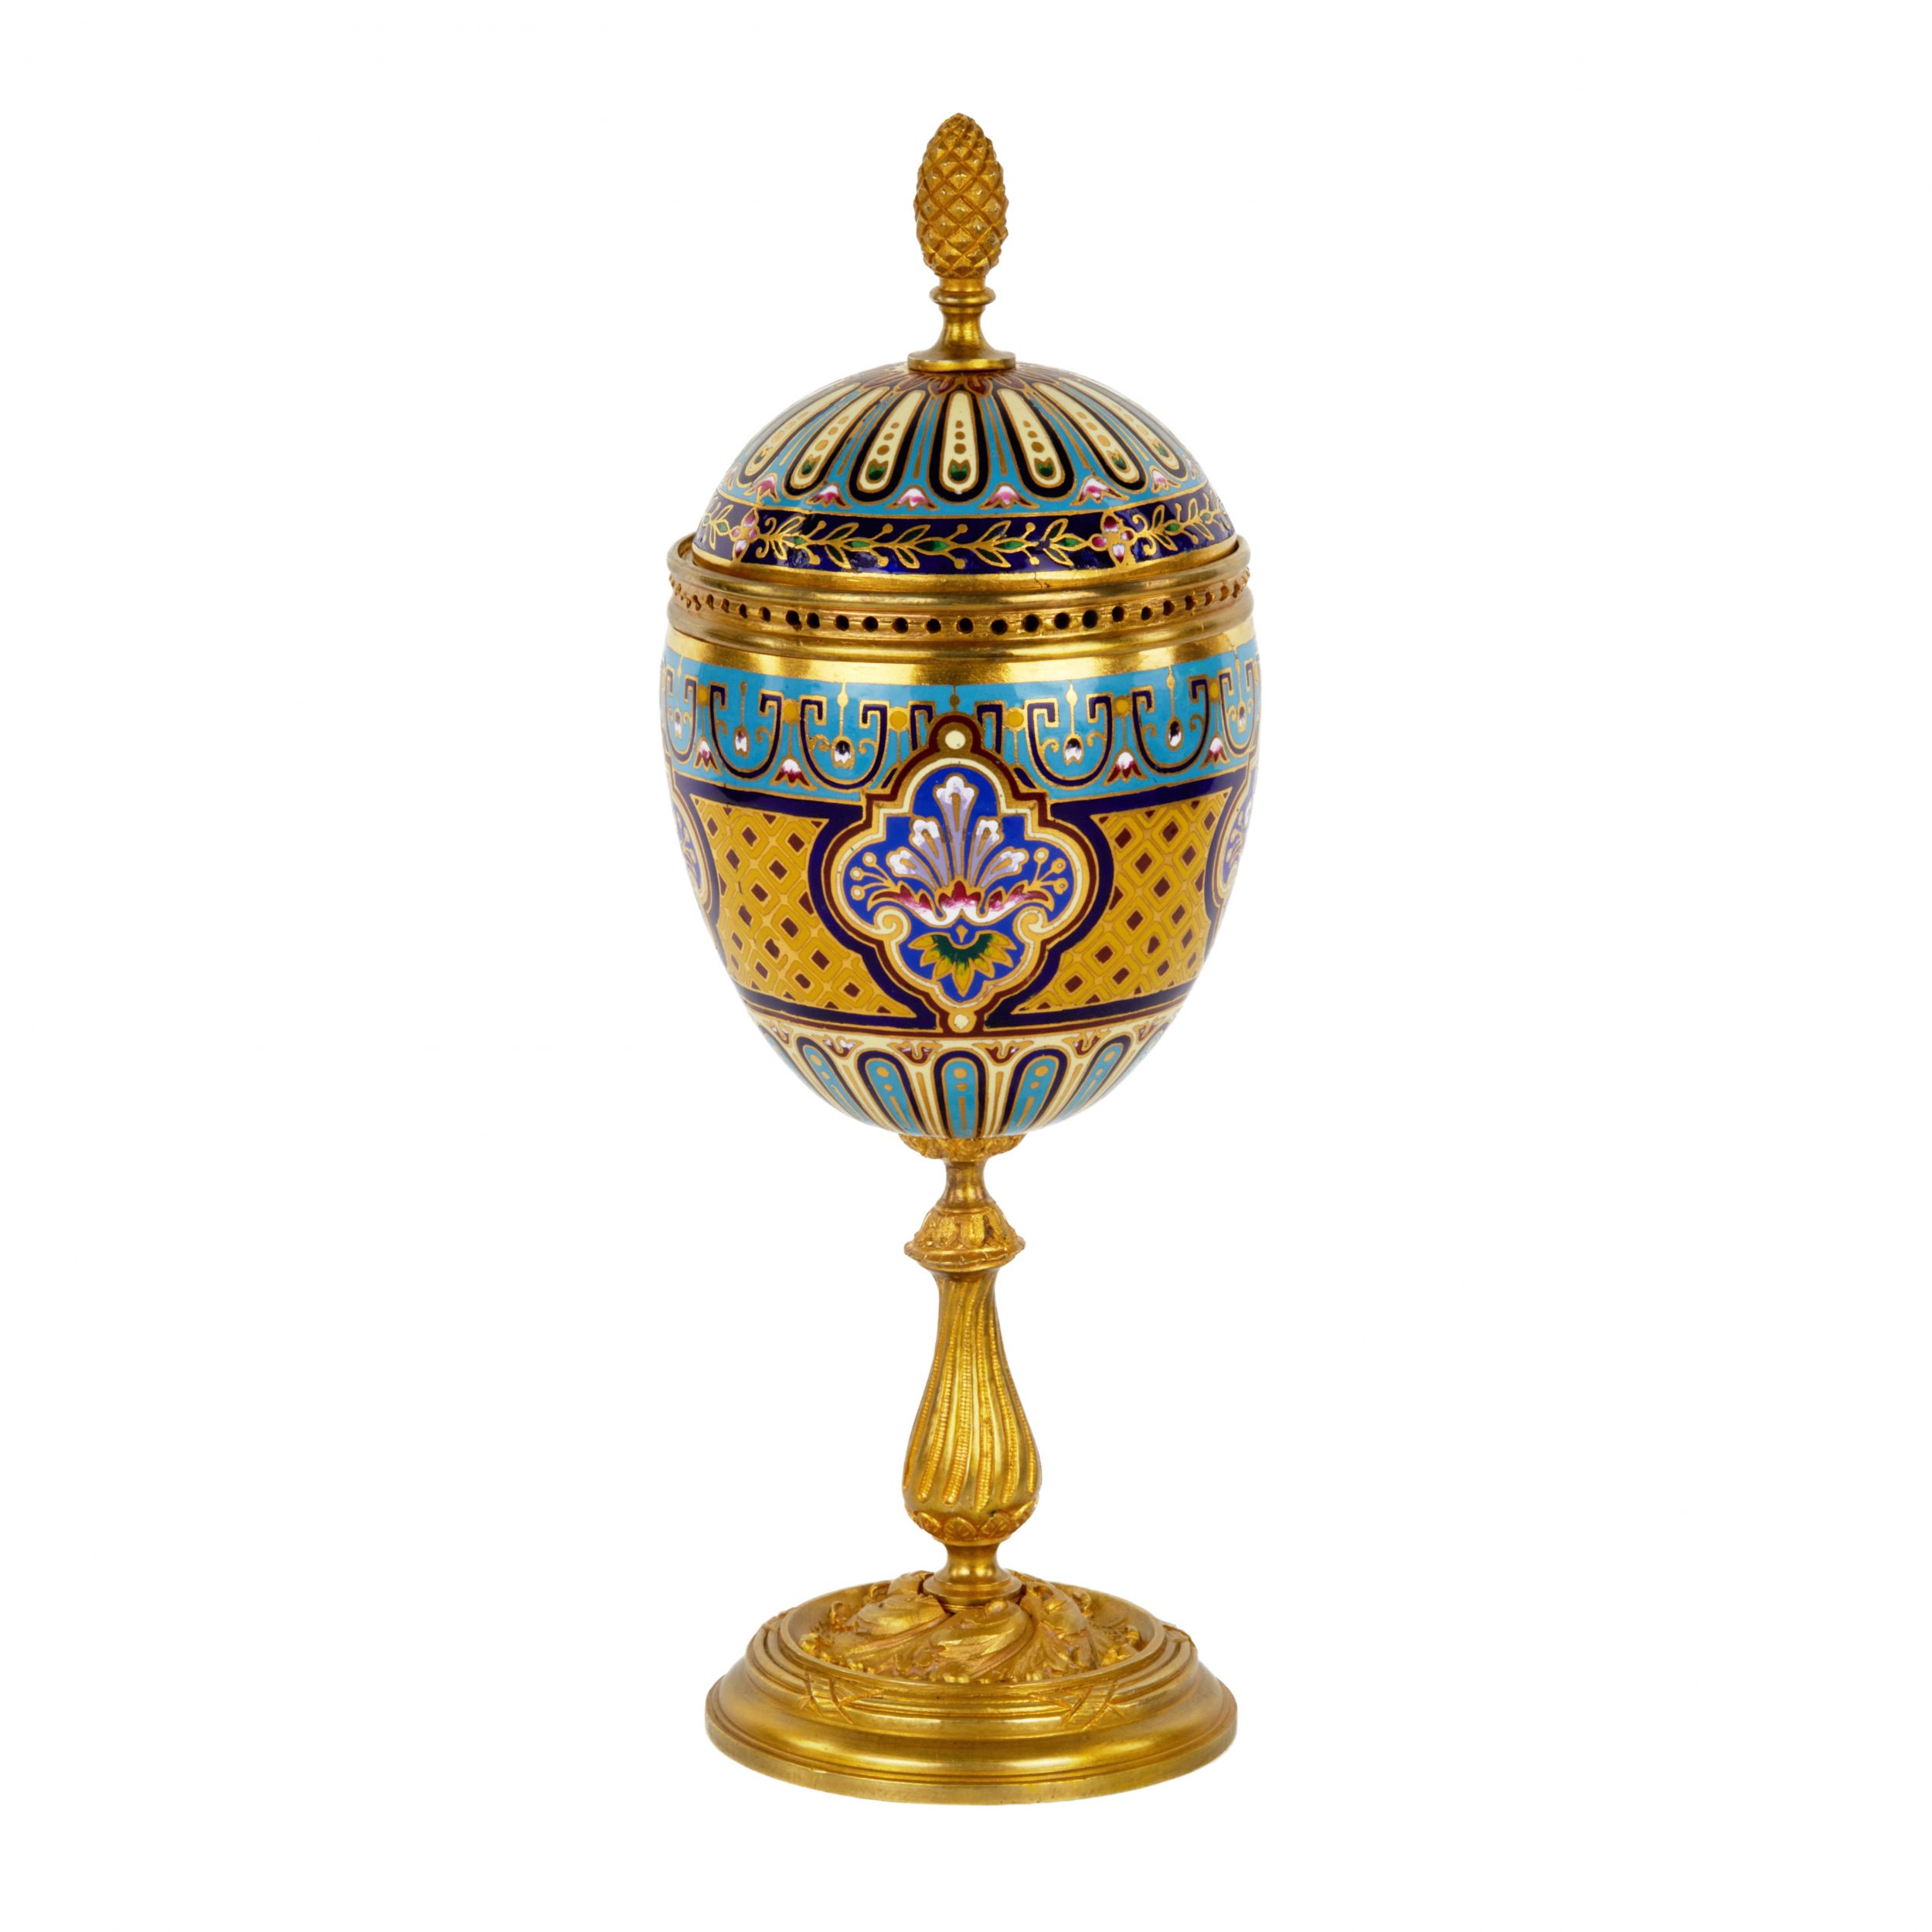 French-goblet-in-bronze-with-enamel-design-19th-century-